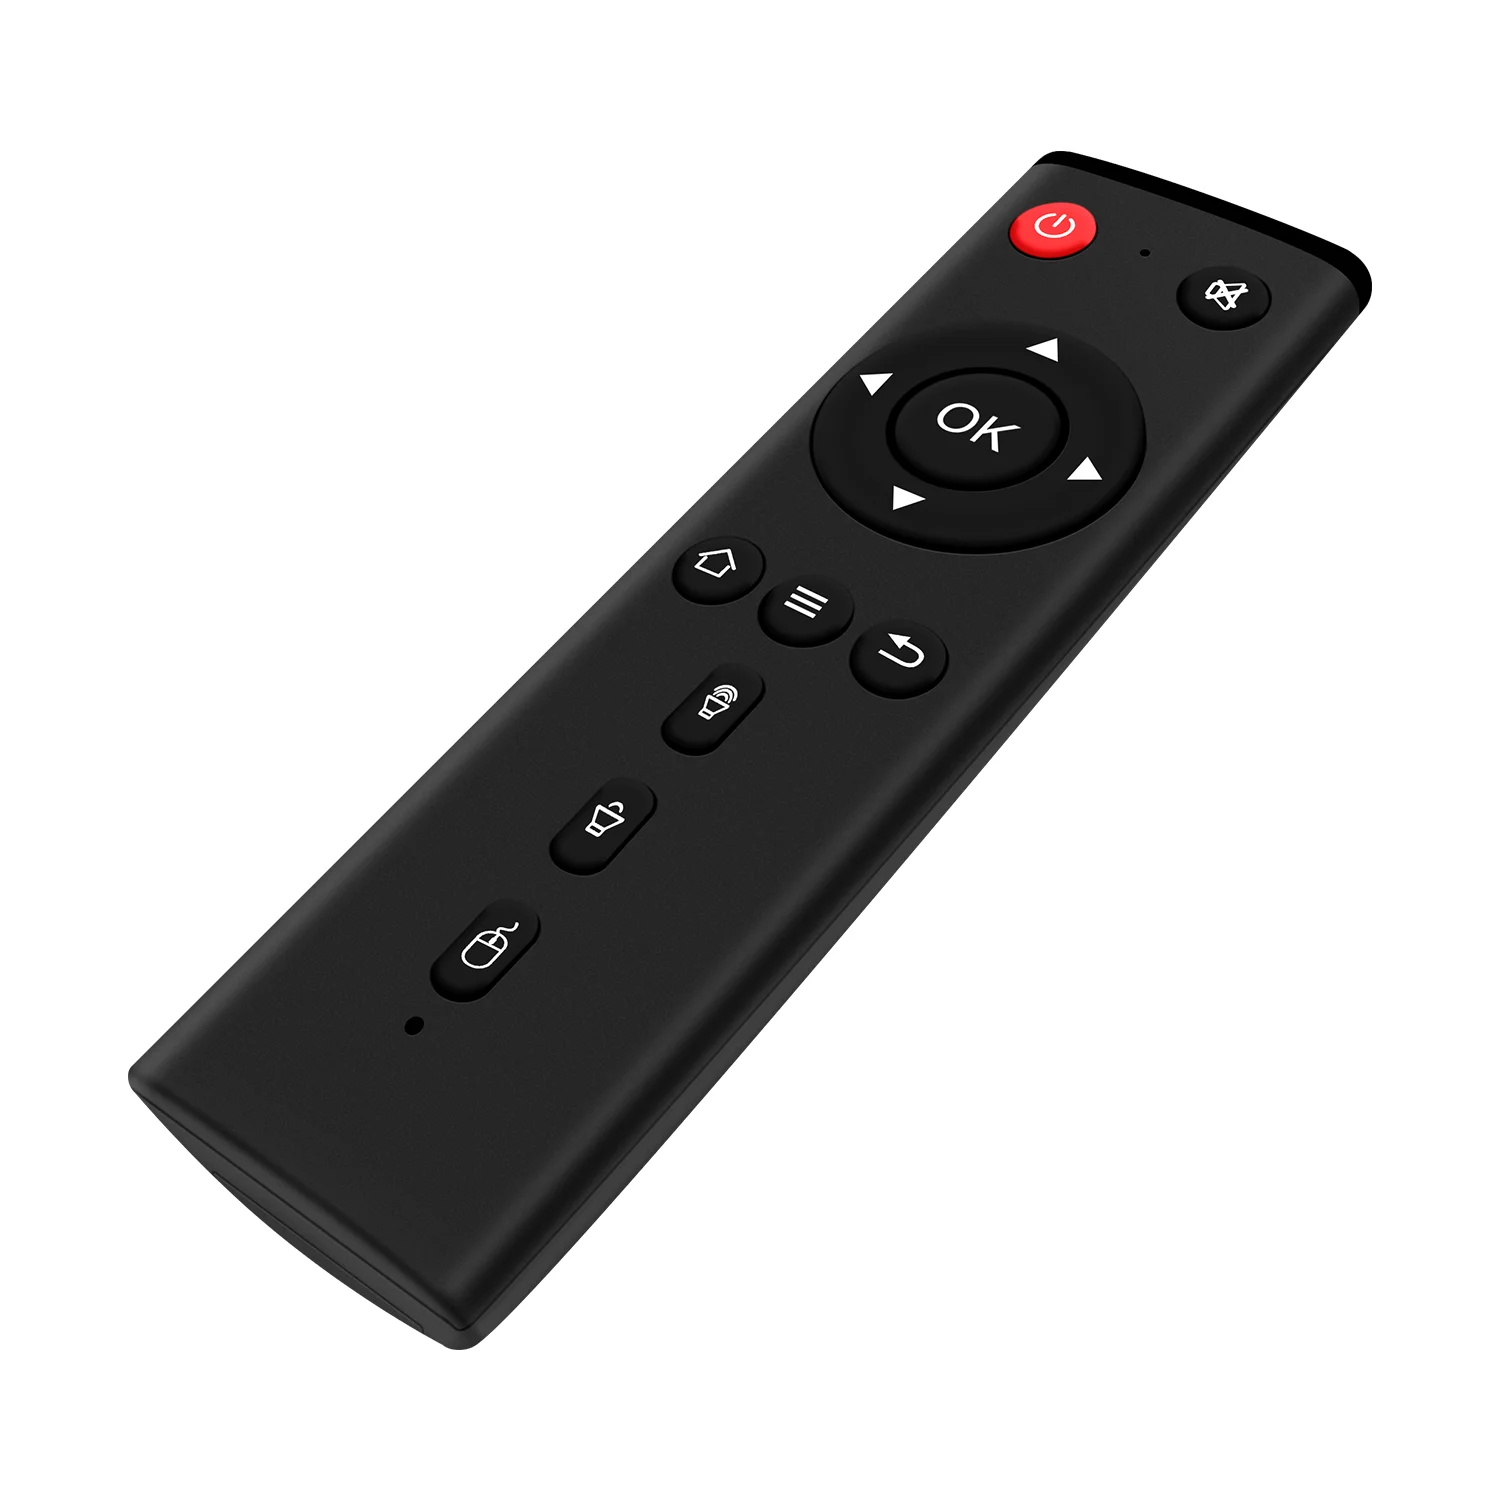 
2.4G Wireless air mouse remote control OTT DVB STB remote controller with higher glossy finish and learning function 